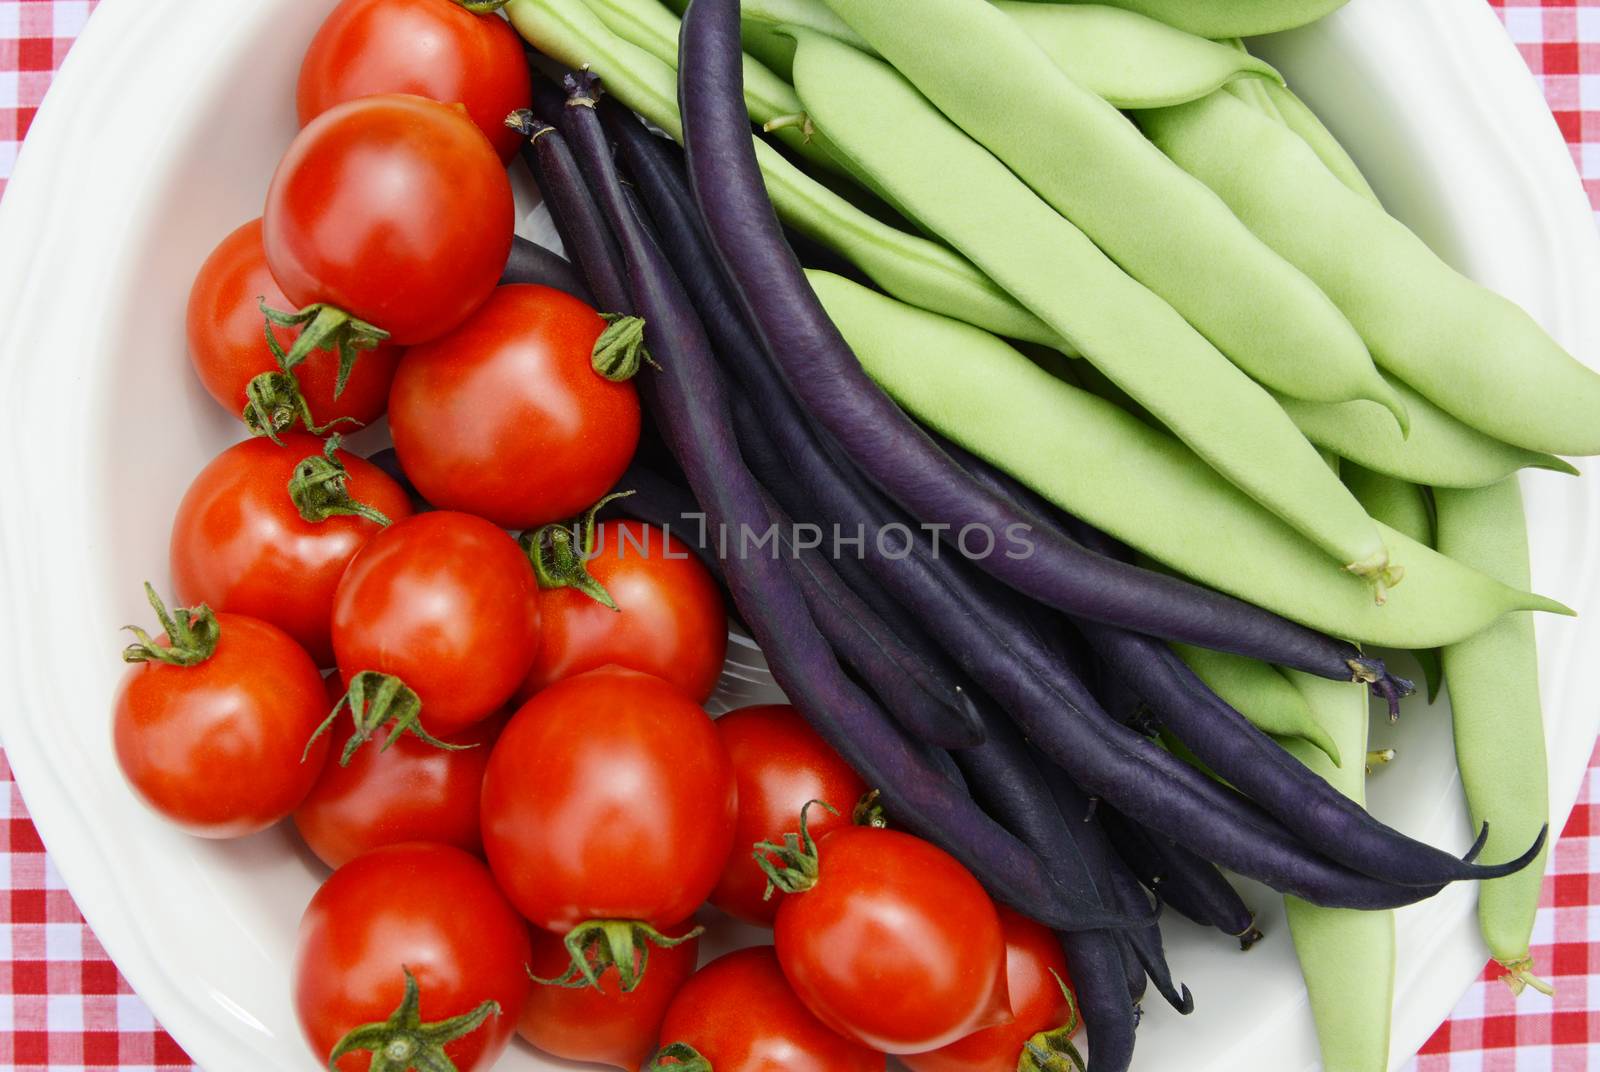 Juicy cherry tomatoes with purple French beans and green Calypso beans in a serving dish - seen from above